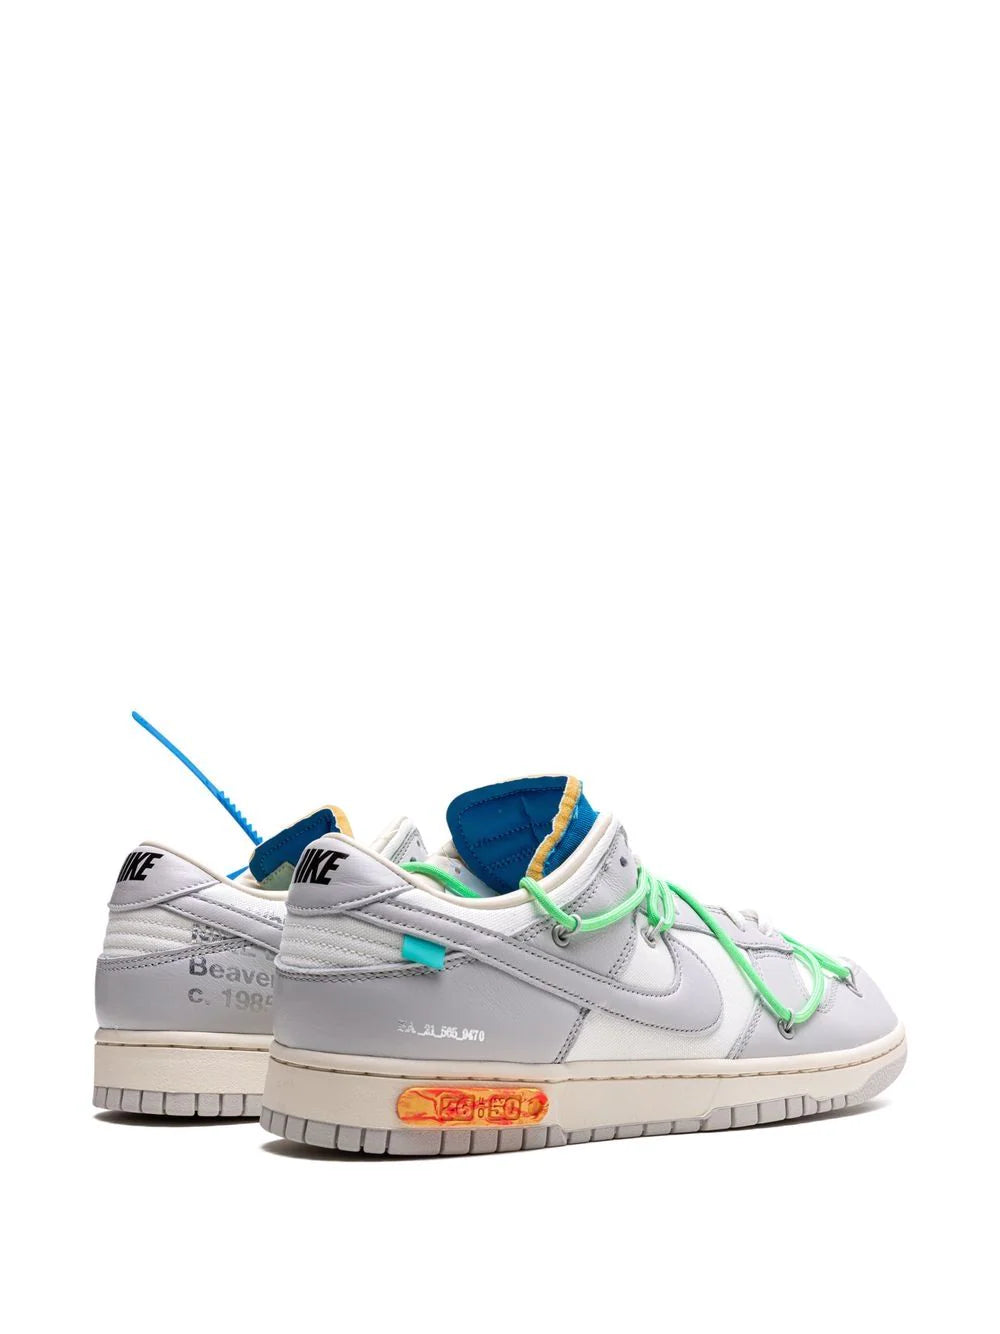 Nike X Off-White lot 26 of 50